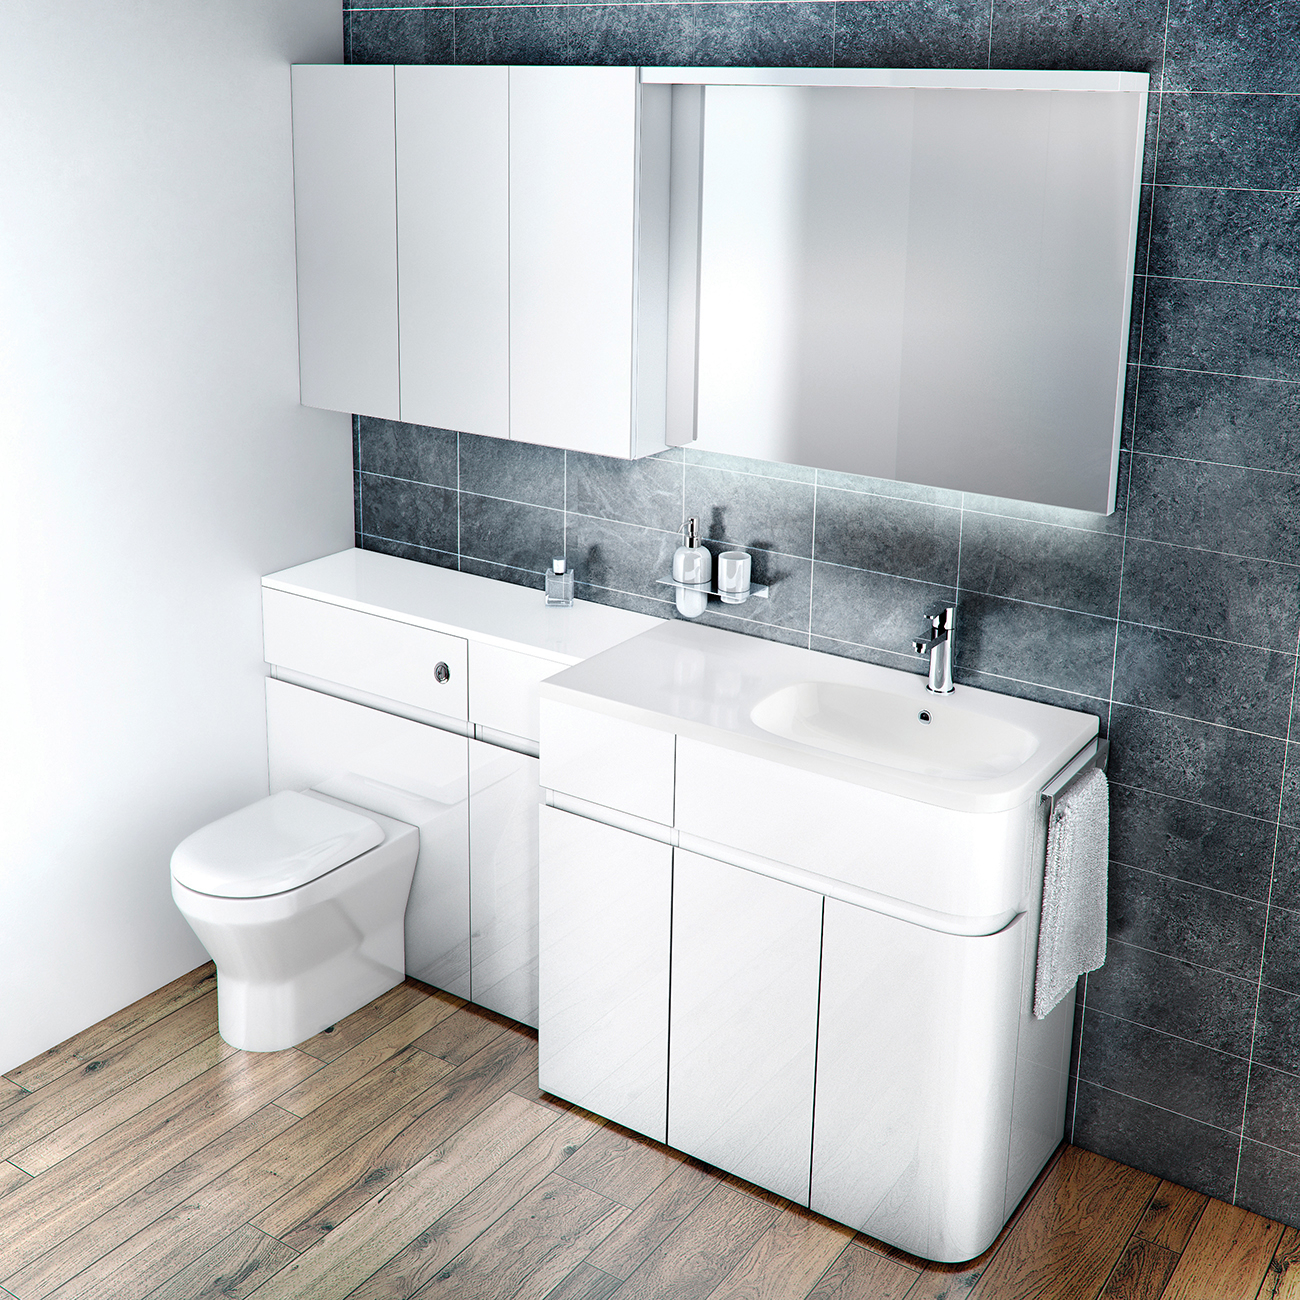 Aqua Cabinets D450 Fitted Bathroom Furniture Uk Bathroom within proportions 1300 X 1300